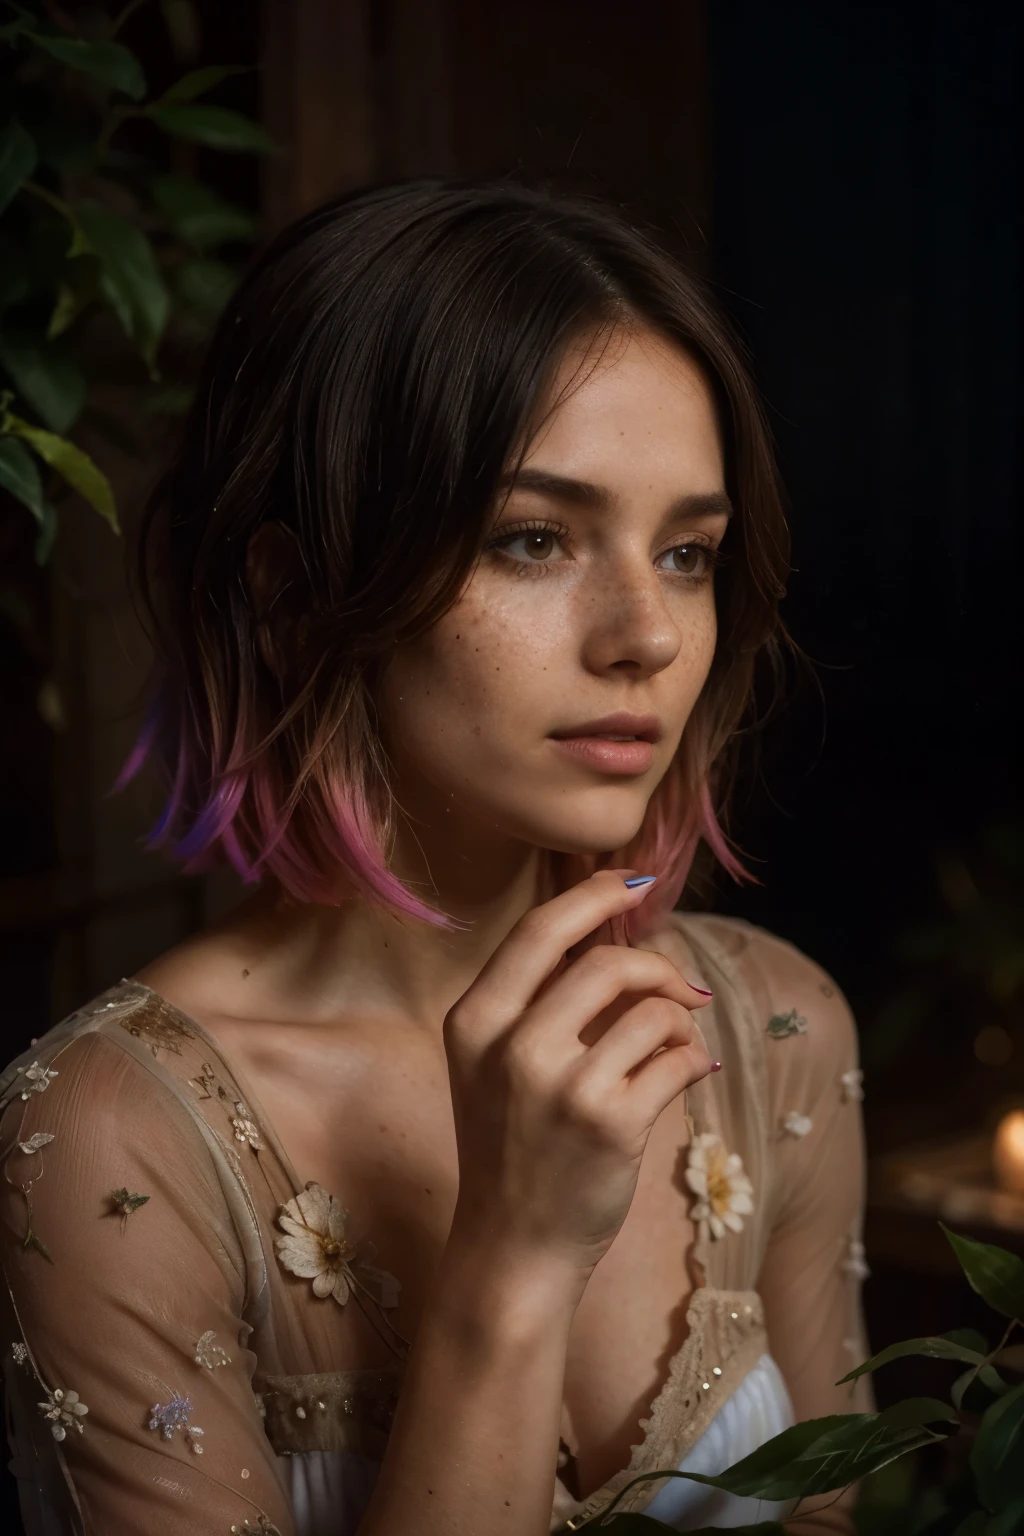 photo of beautiful 26 y.o woman, 4k uhd, high quality, dramatic, cinematic, (short pixie (ombre hair:1.2)), (freckles:1.2), imaginary floral patterns, mist of fragrance, noticeable, the bird seed in her hands, growing into birds, giants shelter her body, intricate ornate structure, radiating, the night sky, deep dark shadows, hide new seasons, the woman is aware and watching us